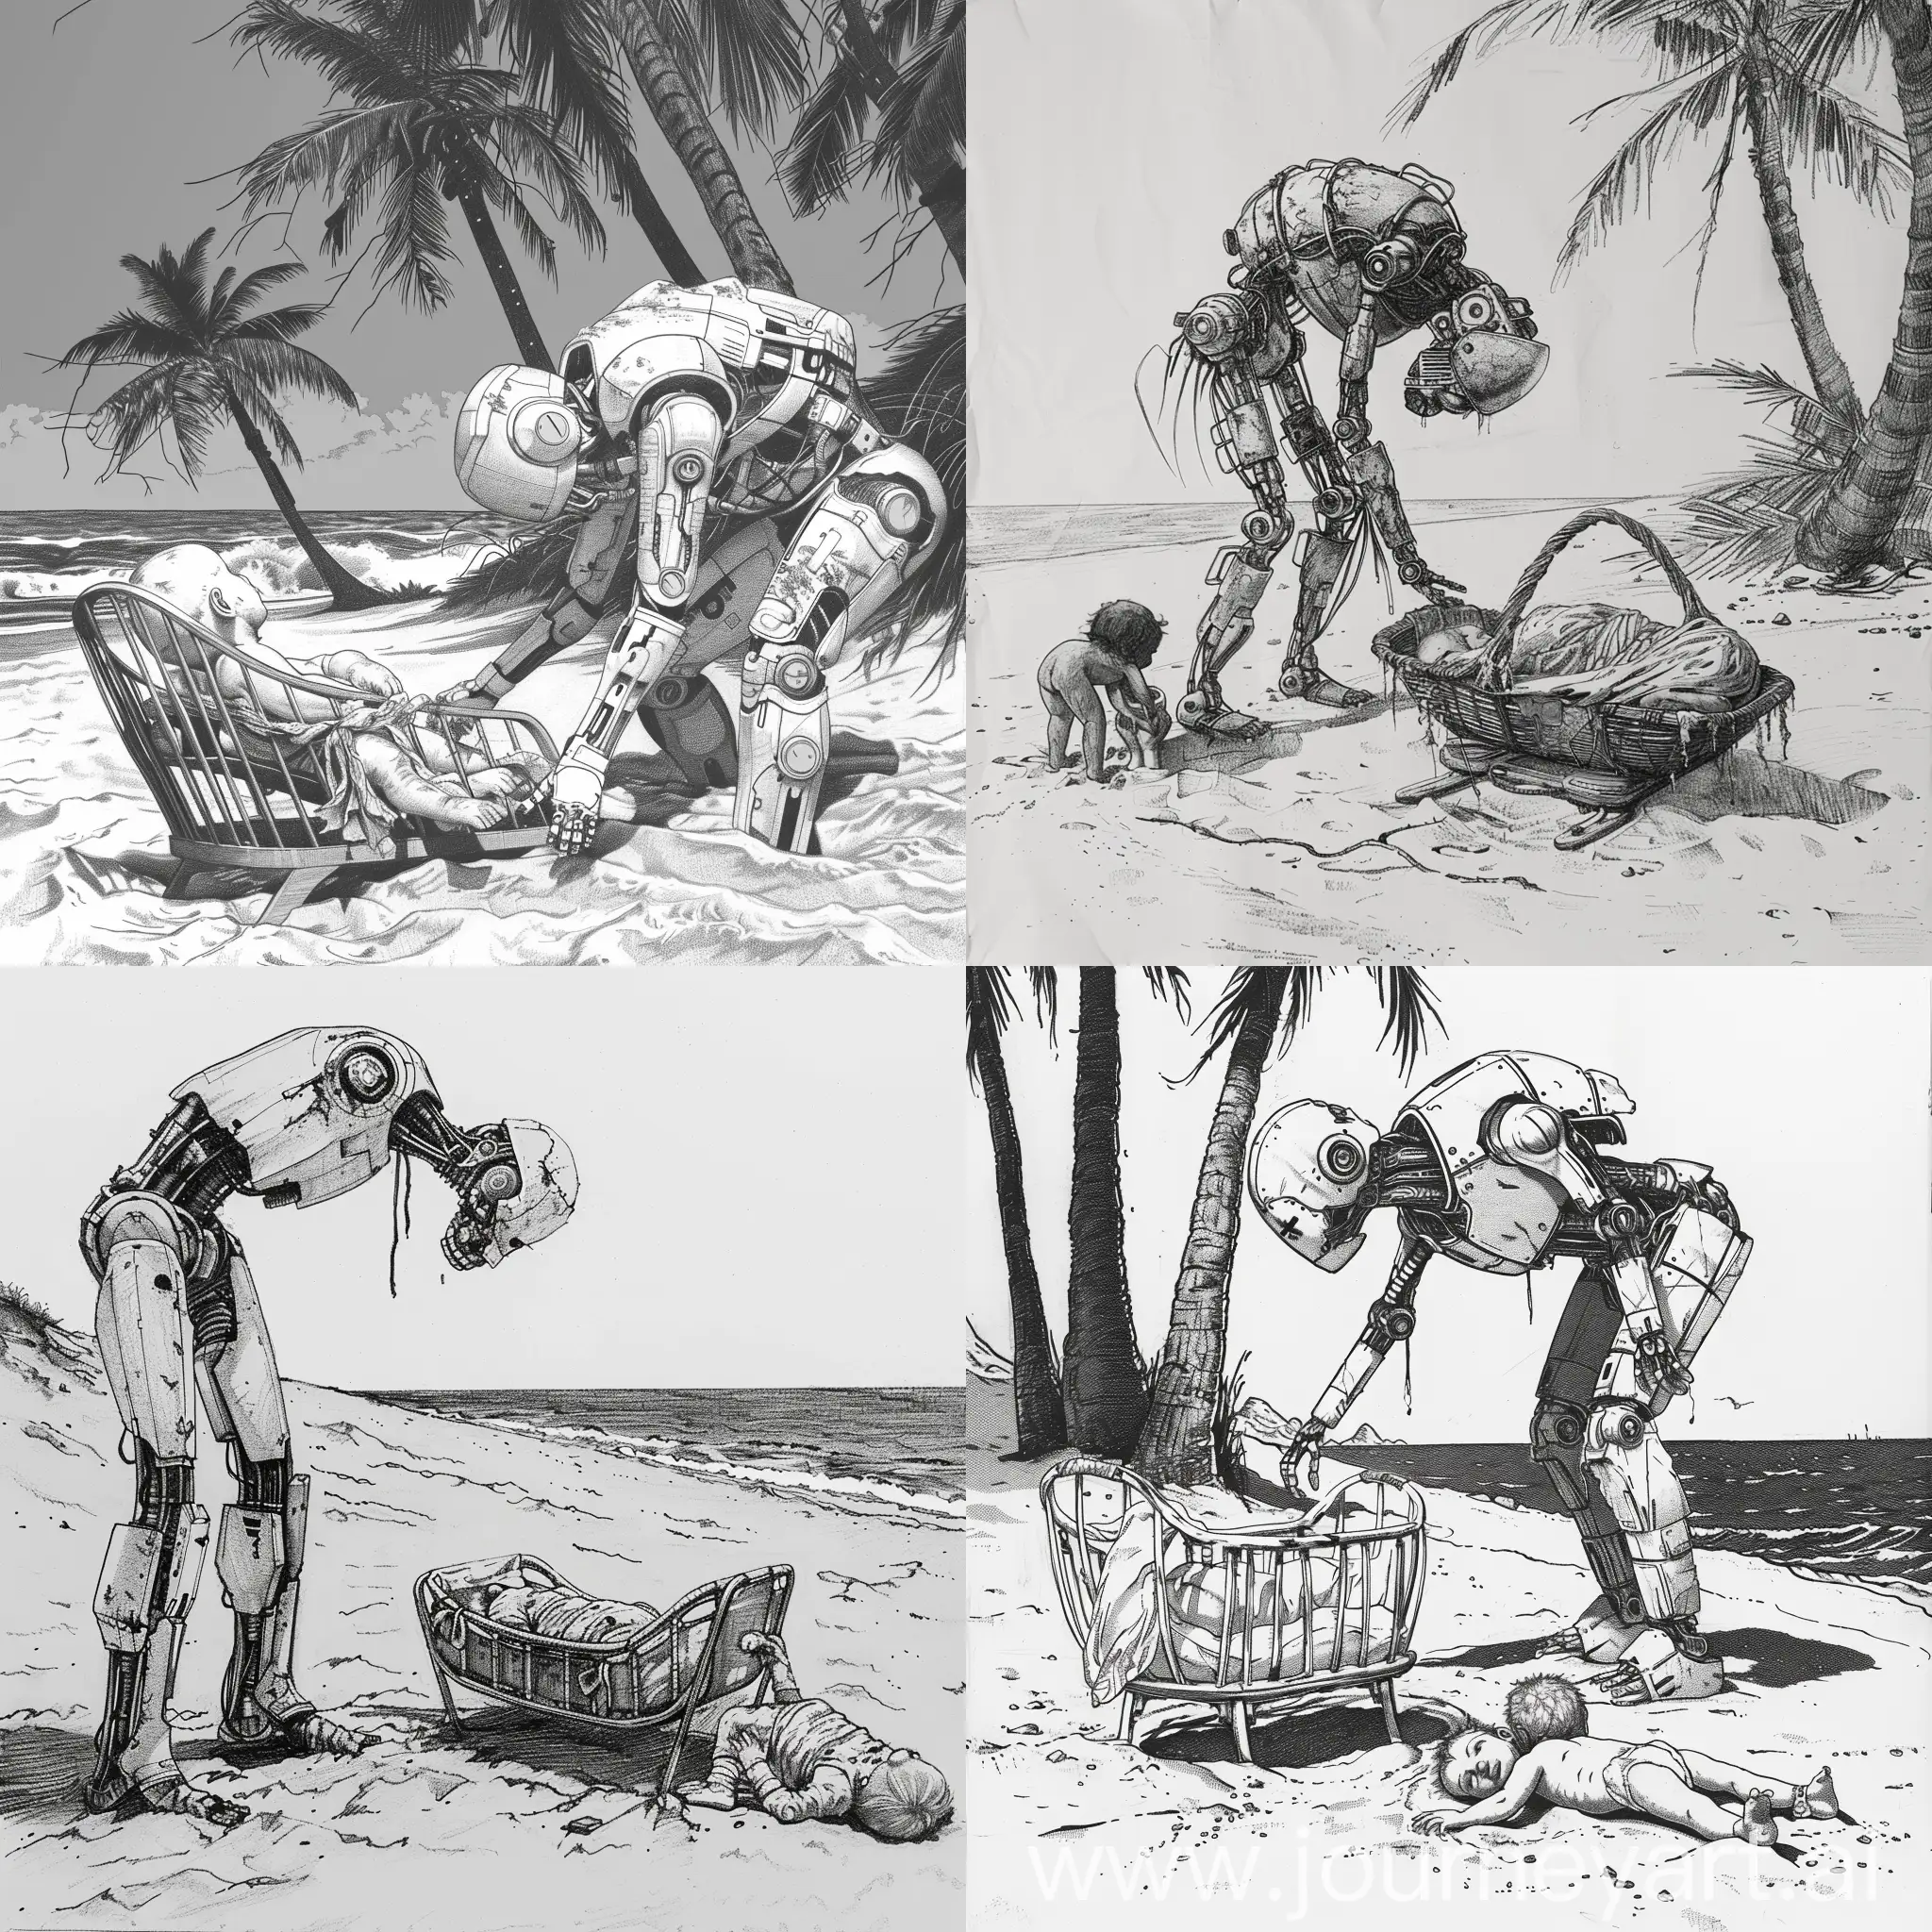 Drawing, black/white, a Mexican beach, a cradle with a child is lying on the sand, a robot nanny is bending over the child, the robot nanny is damaged